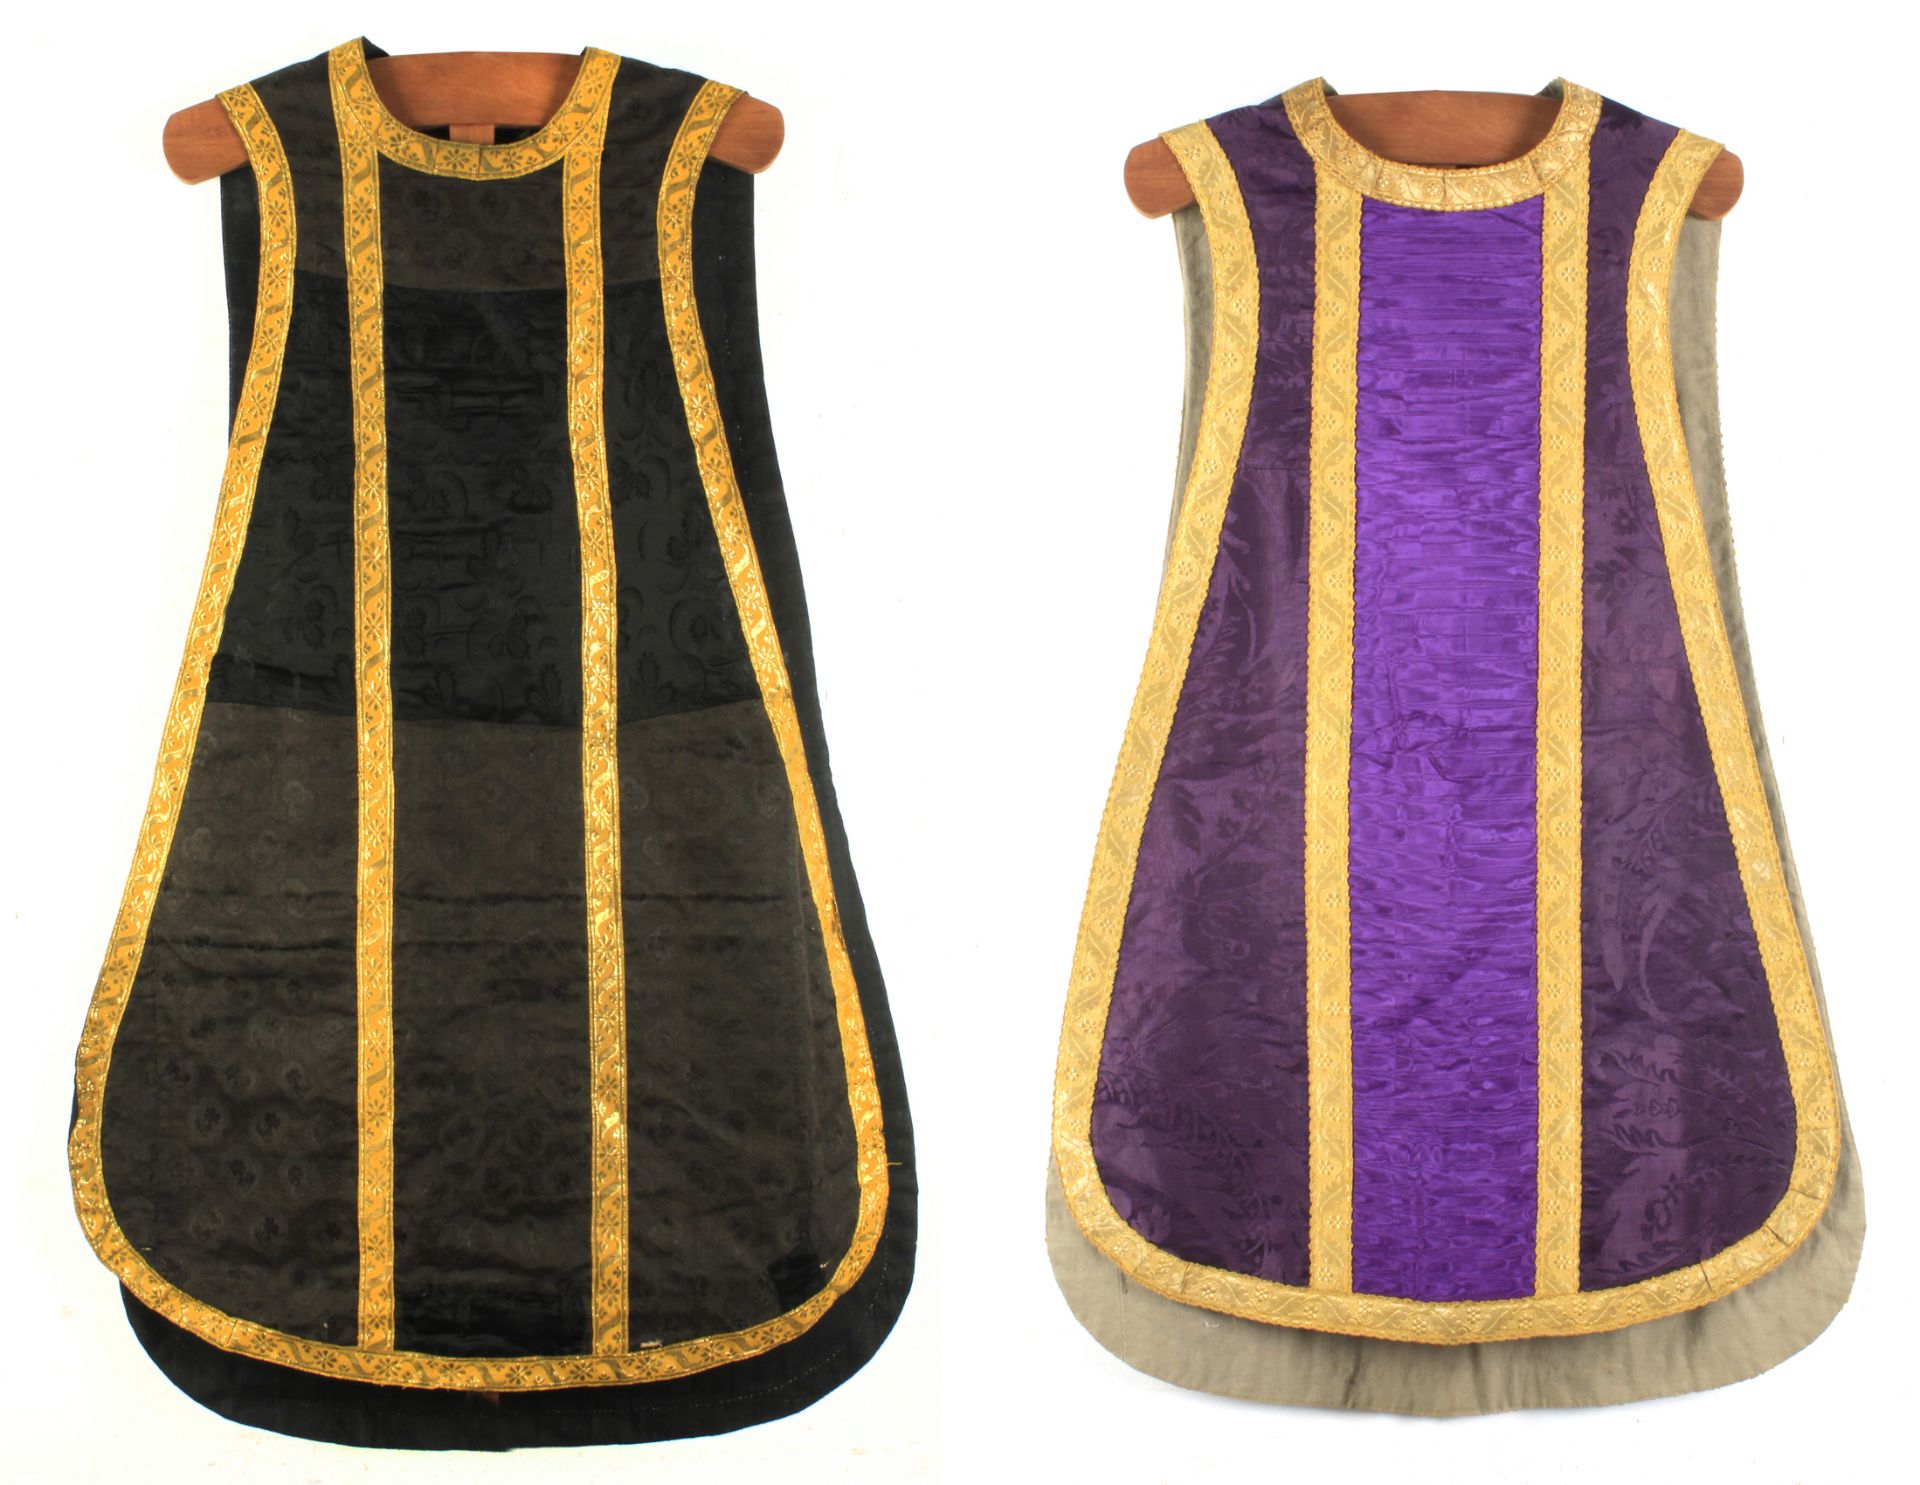 A pair of 19th century Advent and mourning silk Catholic chasubles